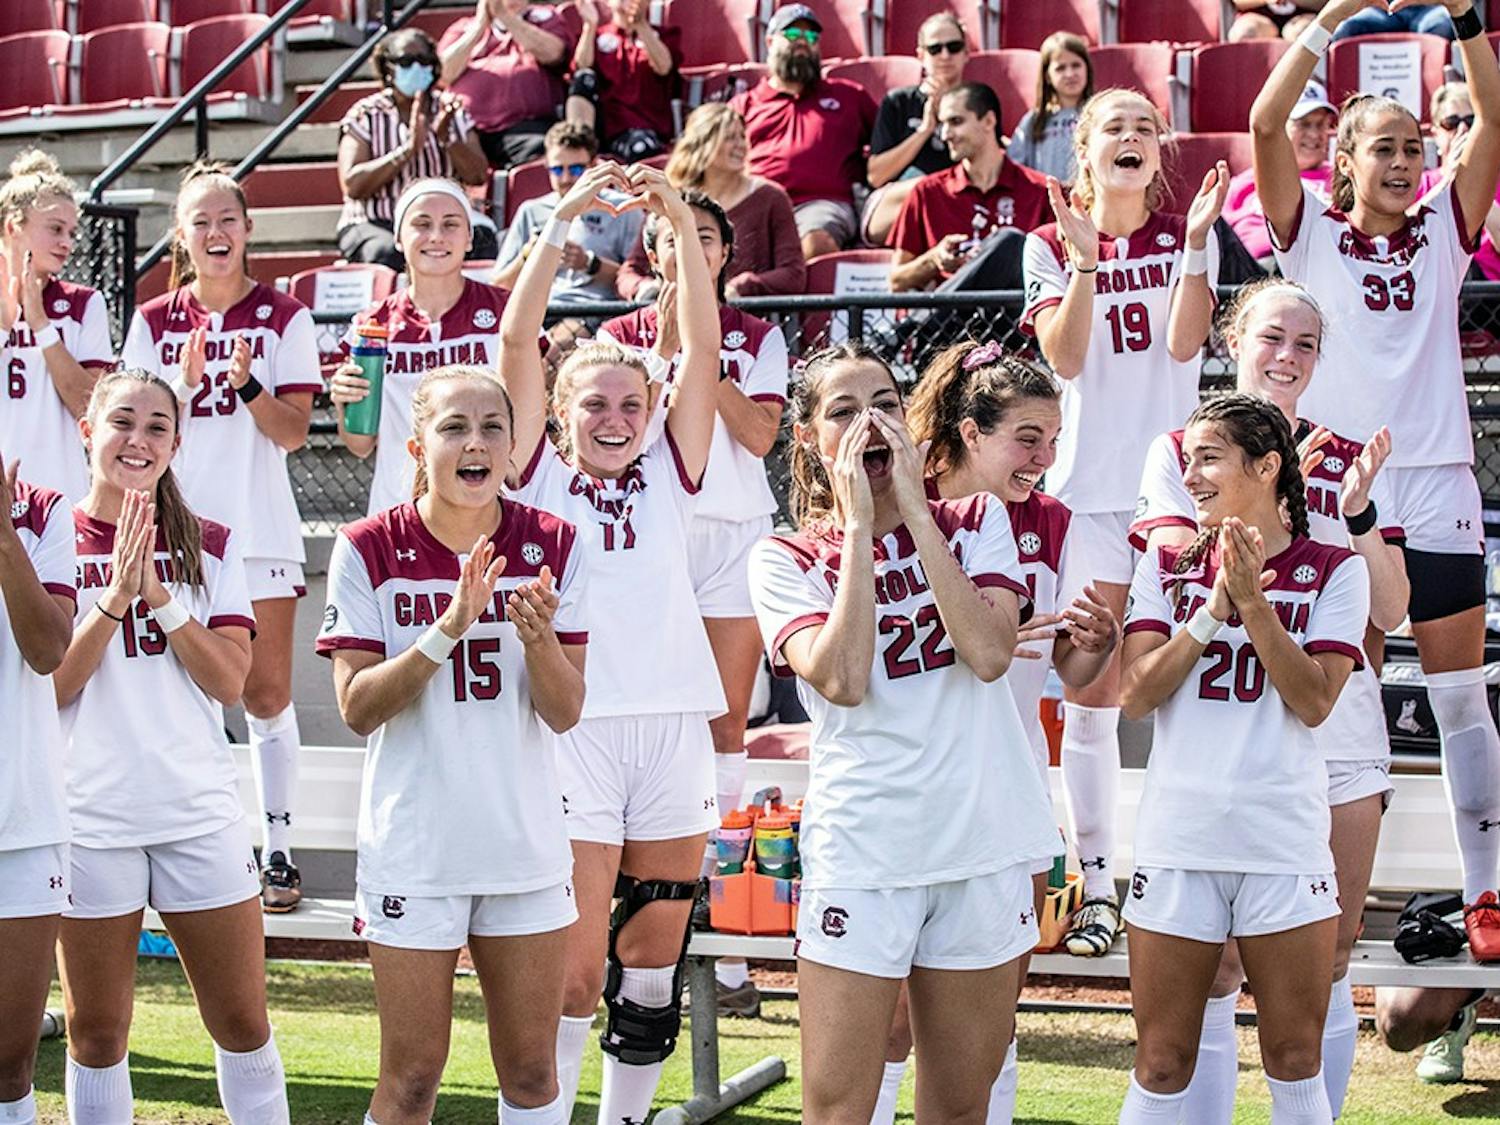 Graduate forward Ryan Gareis, and her teammates cheer at the game versus the Alabama team. The Gamecocks defeated Hofstra 3-0 on Friday, Nov. 19, which advances them to the Round of 16 of the NCAA Tournament.